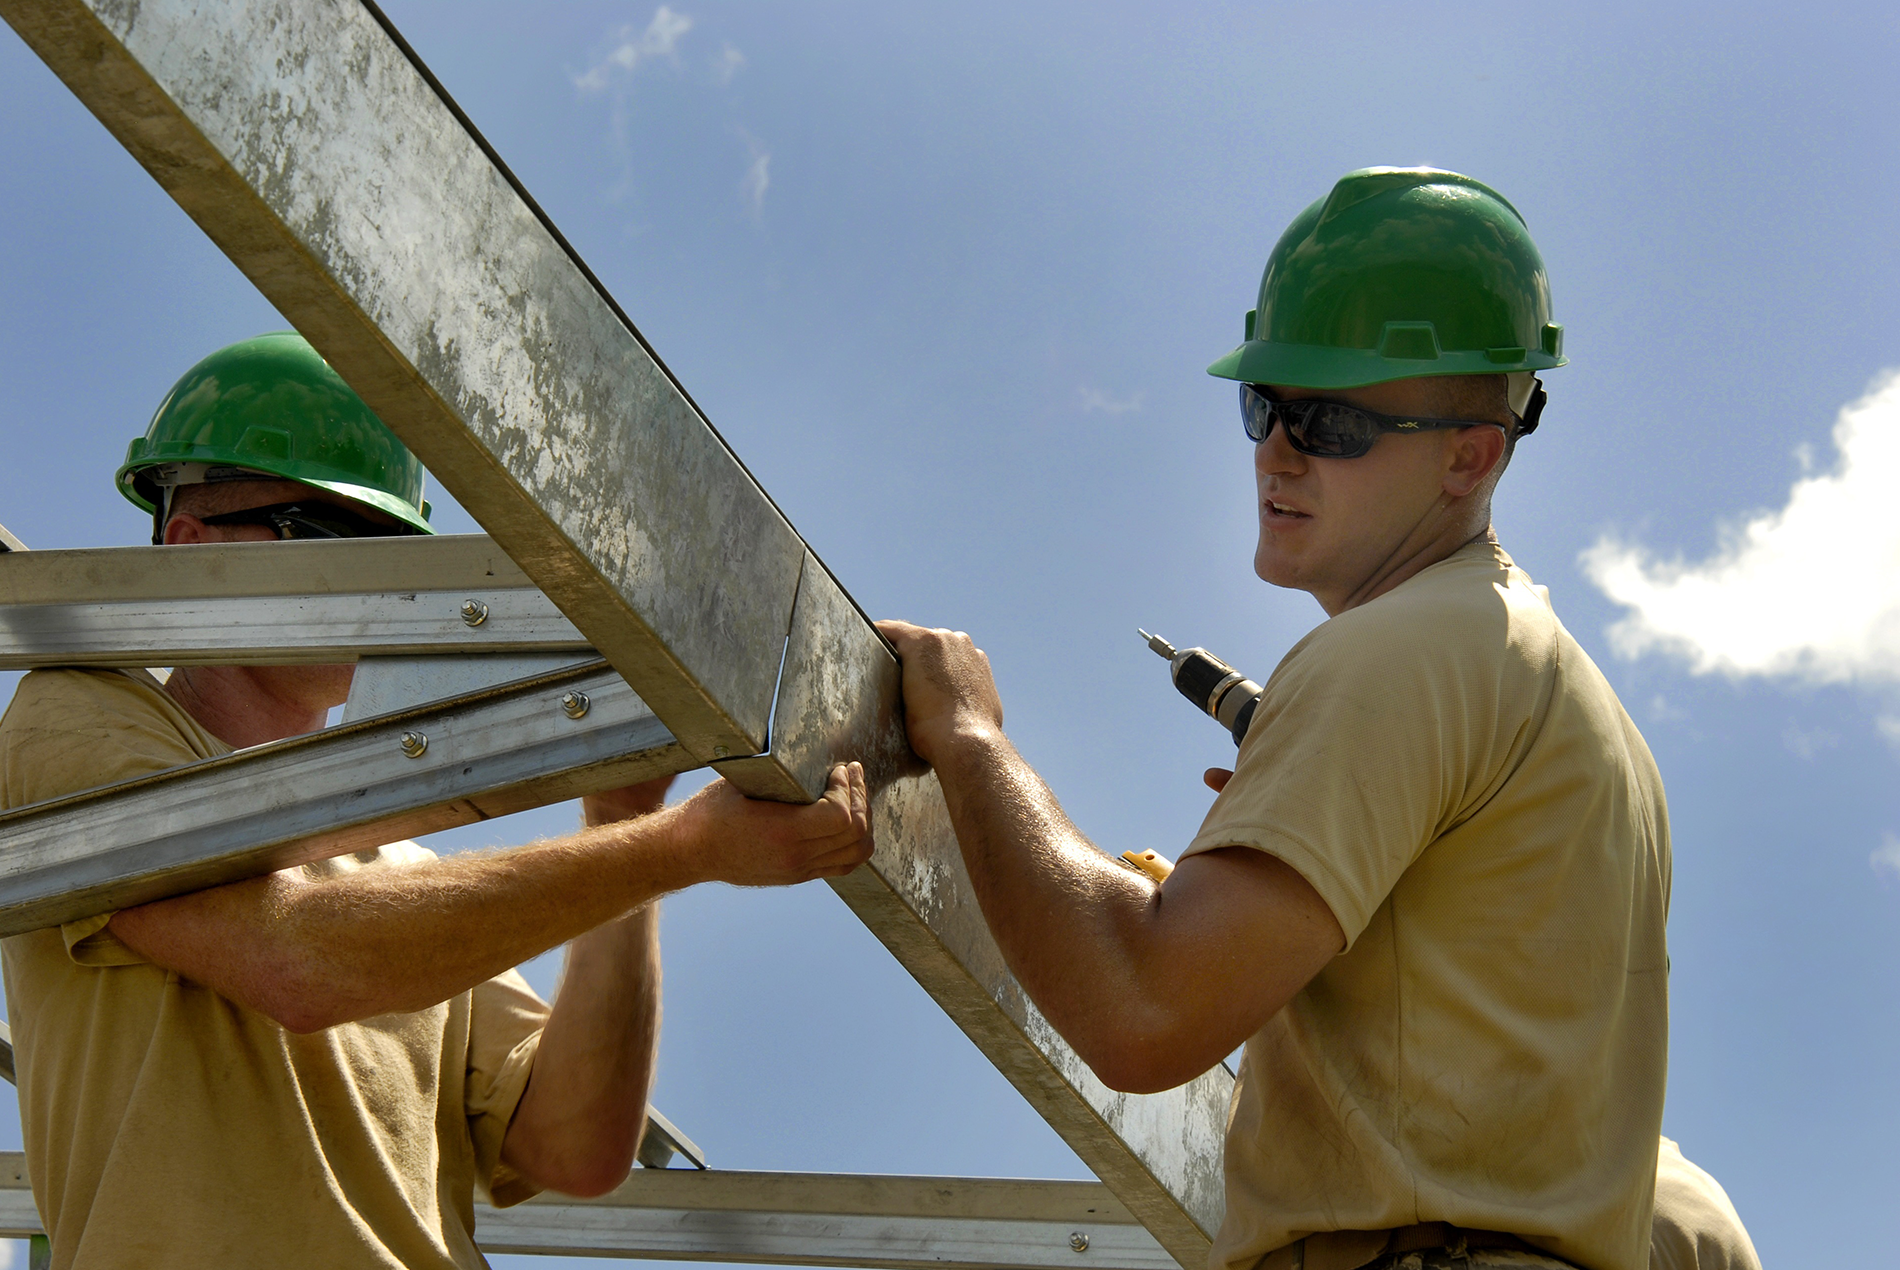 two men holding drills on a construction site